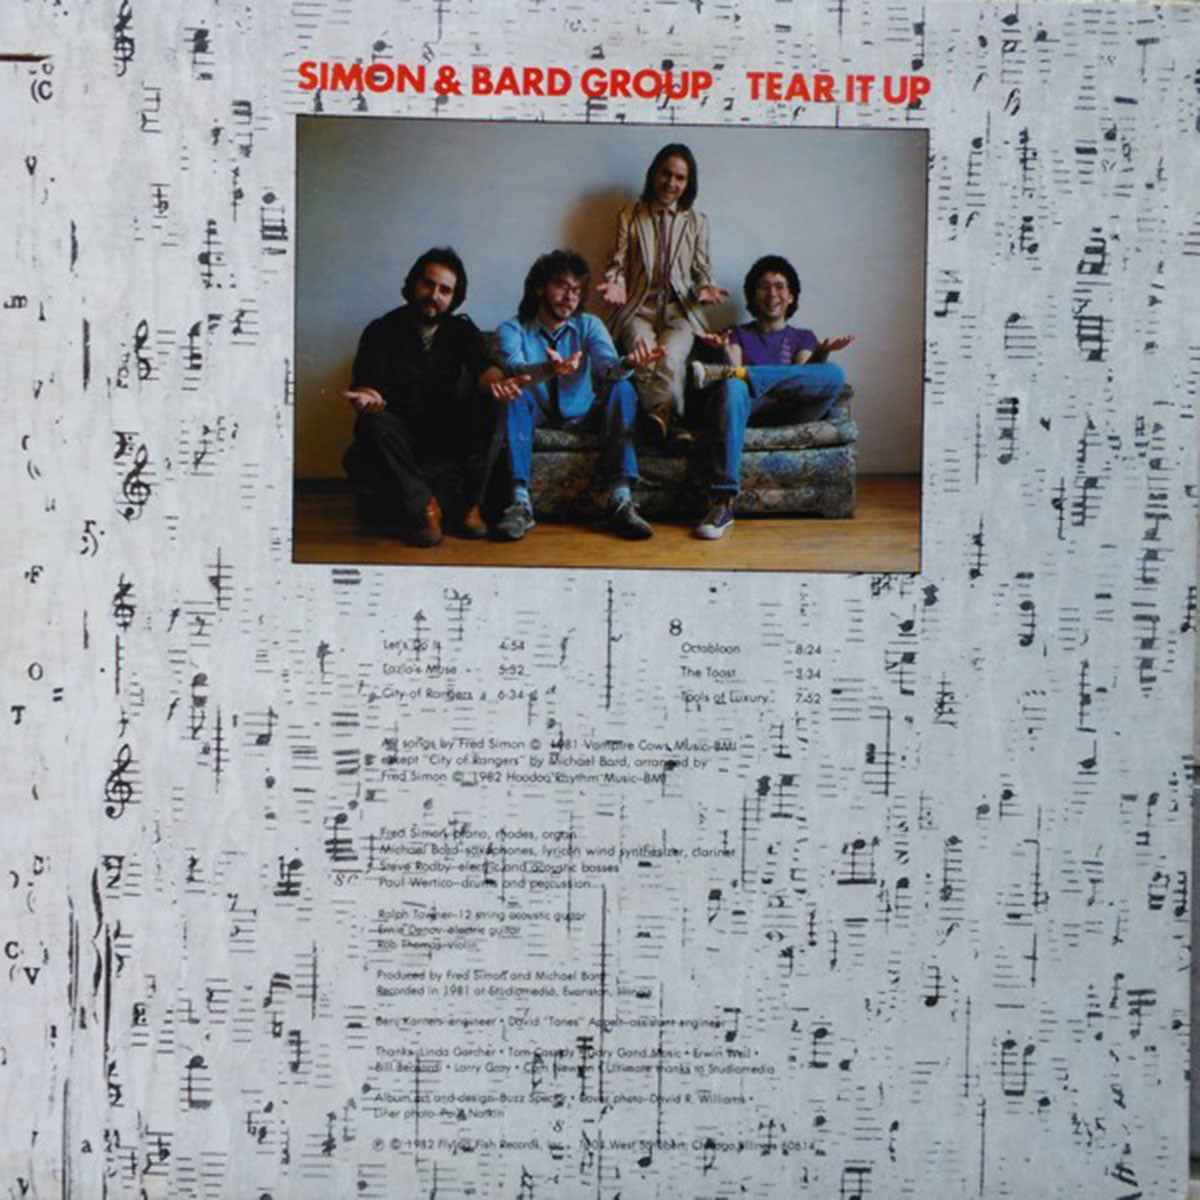 Simon & Bard Group with Ralph Towner ‎– Tear It Up - 1982 US Pressing